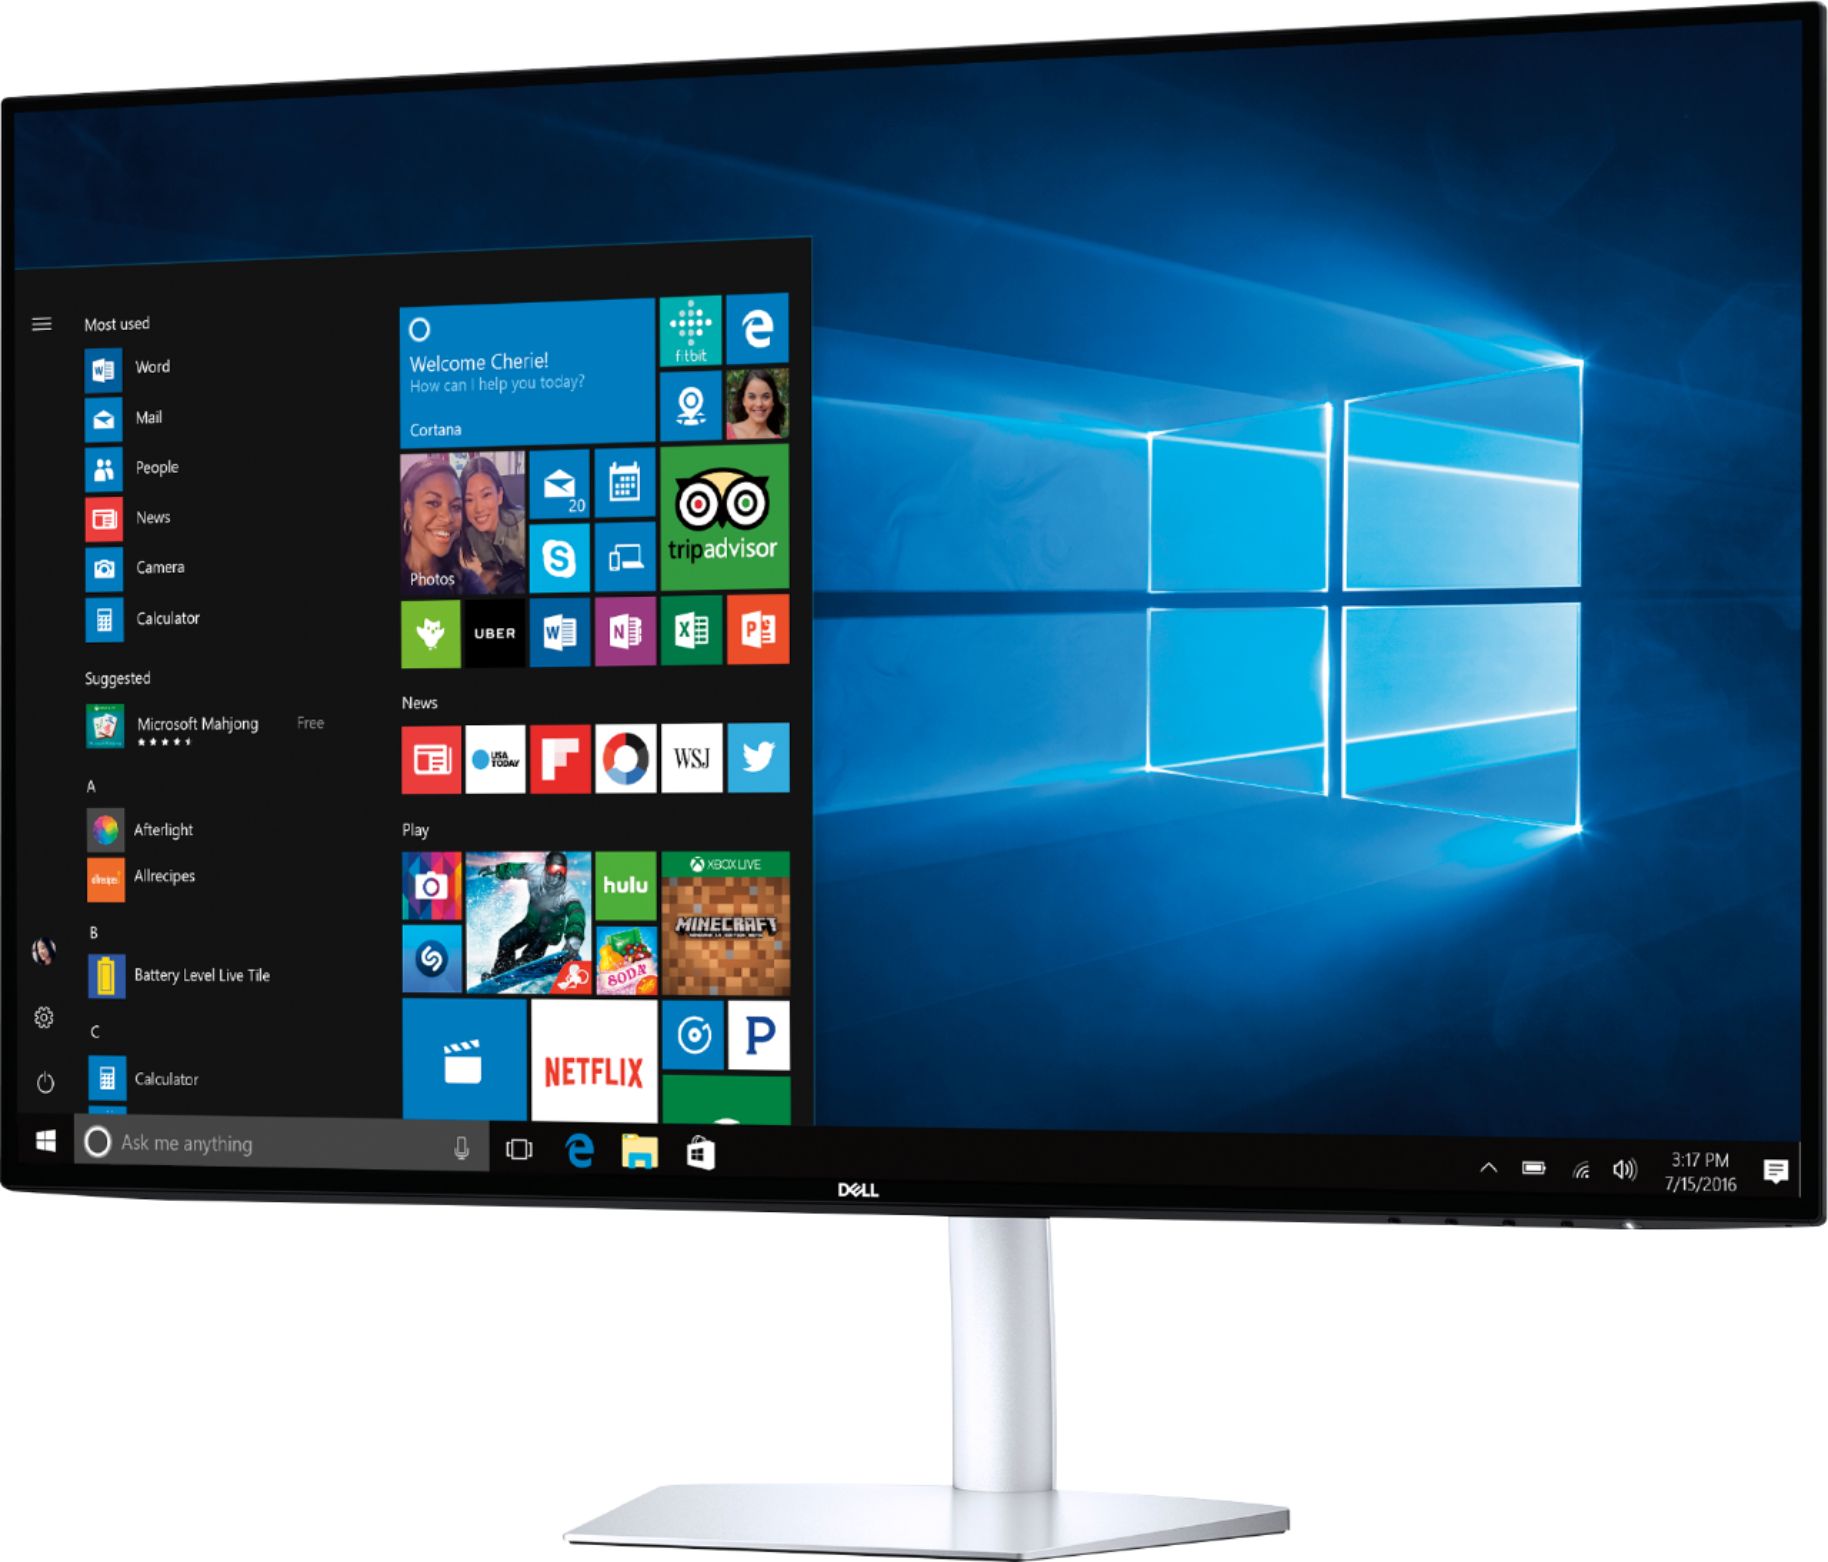 Left View: Dell - 27" IPS LED QHD Monitor with HDR (HDMI)